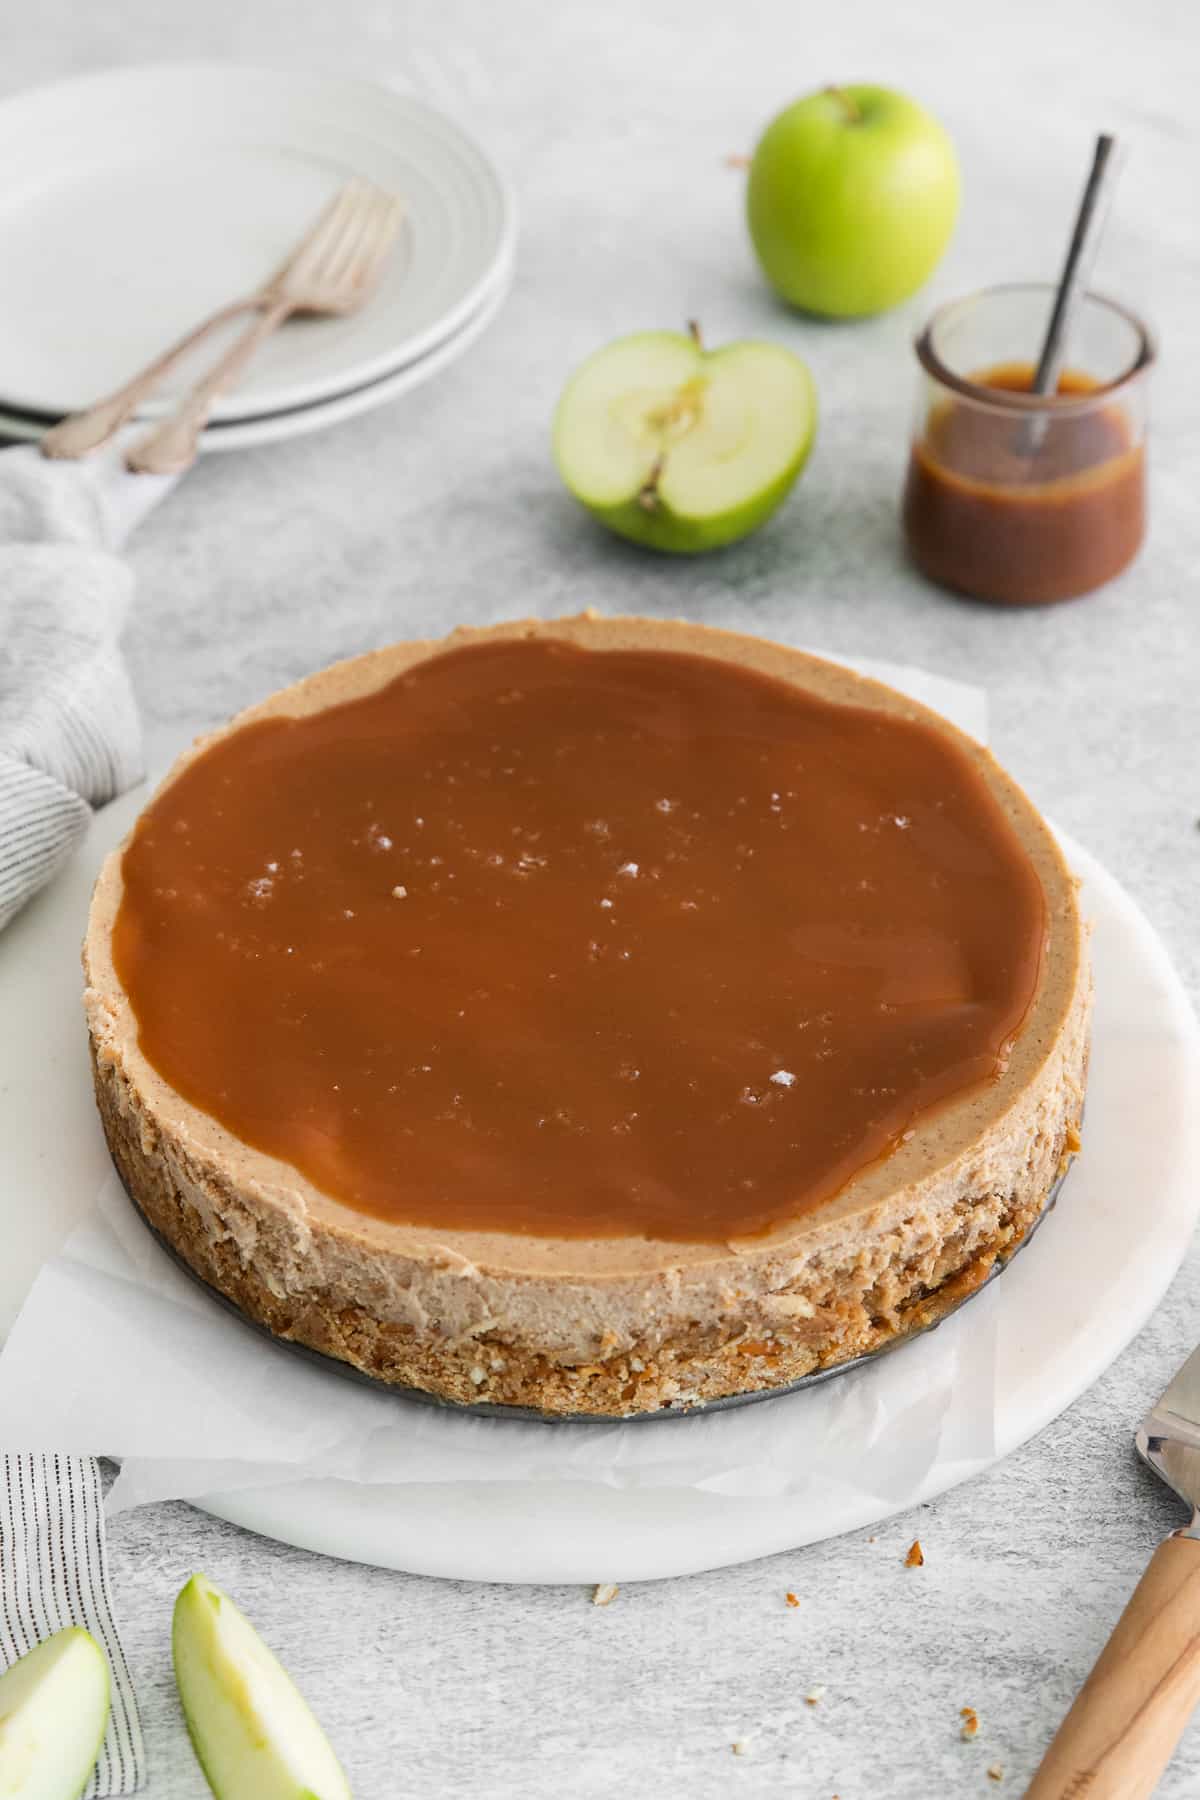 Caramel apple cheesecake topped with caramel sauce and sea salt.